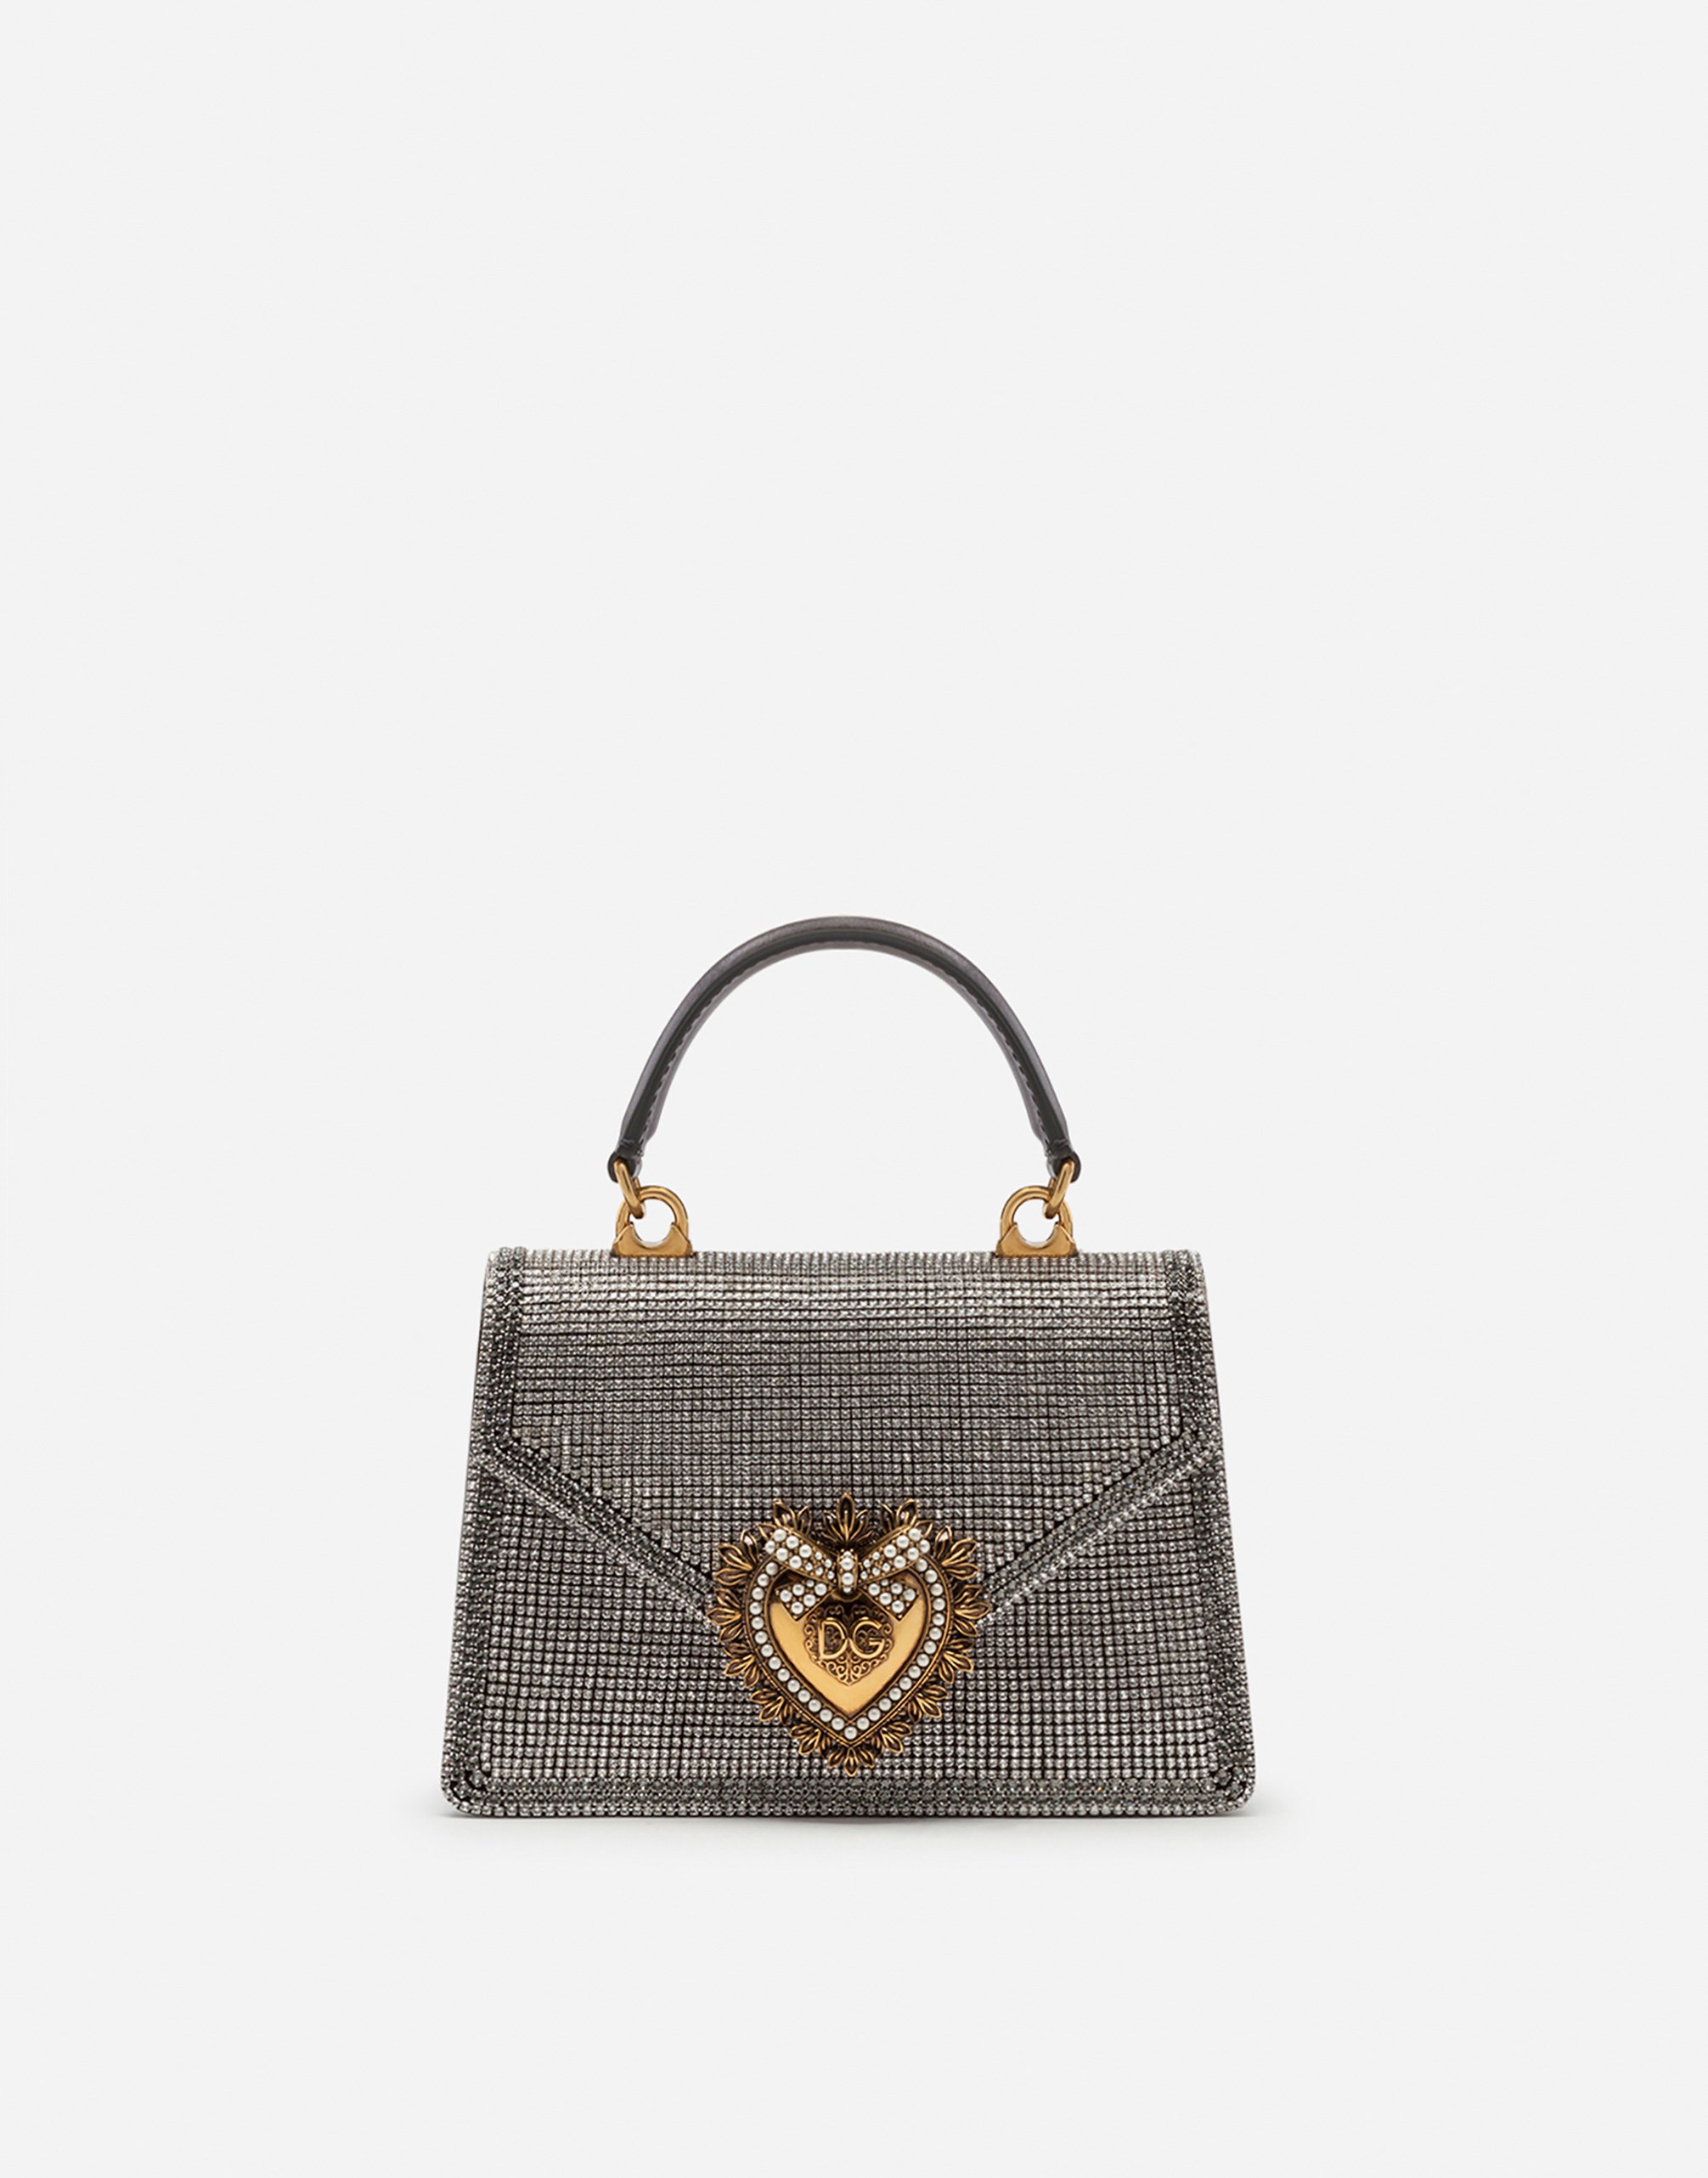 Small Devotion bag in mordore nappa leather with rhinestone detailing in Silver